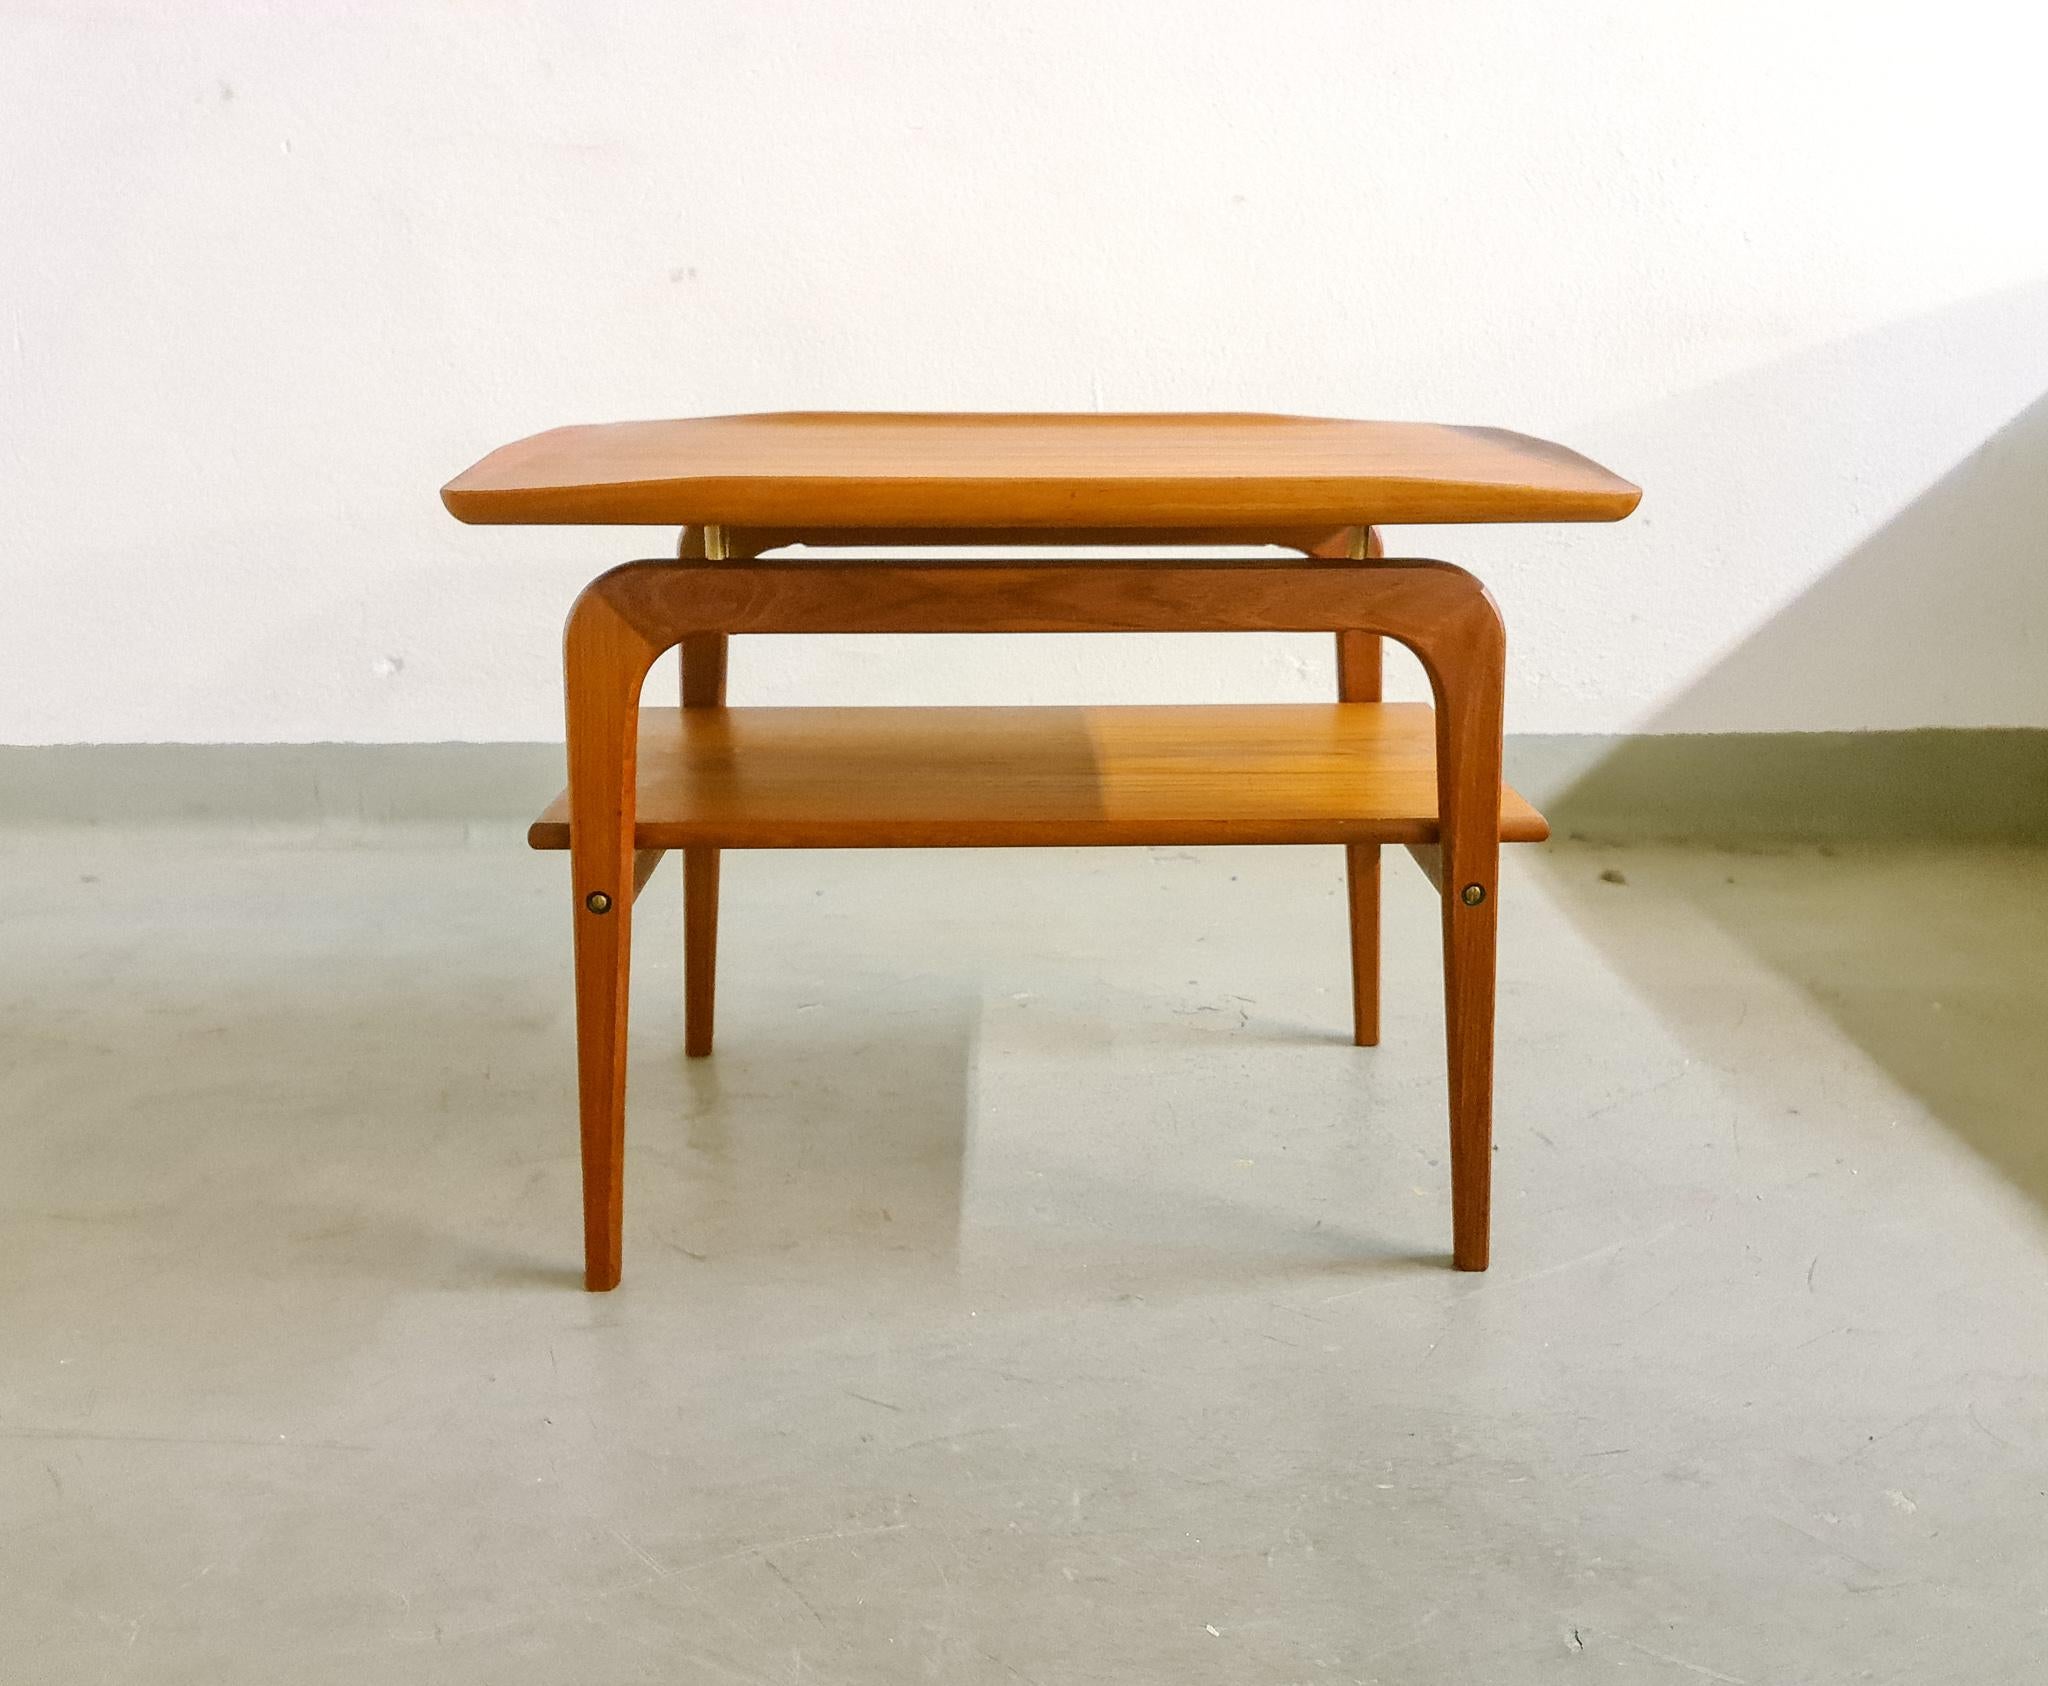 A Classic Danish side or occasional table by Arne Hovmand-Olsen for Mogens Kold. Teak wood with teak shelf and raised edges-quality construction. Solid, elegant and practical with beautiful patina and excellent condition.

Good vintage condition